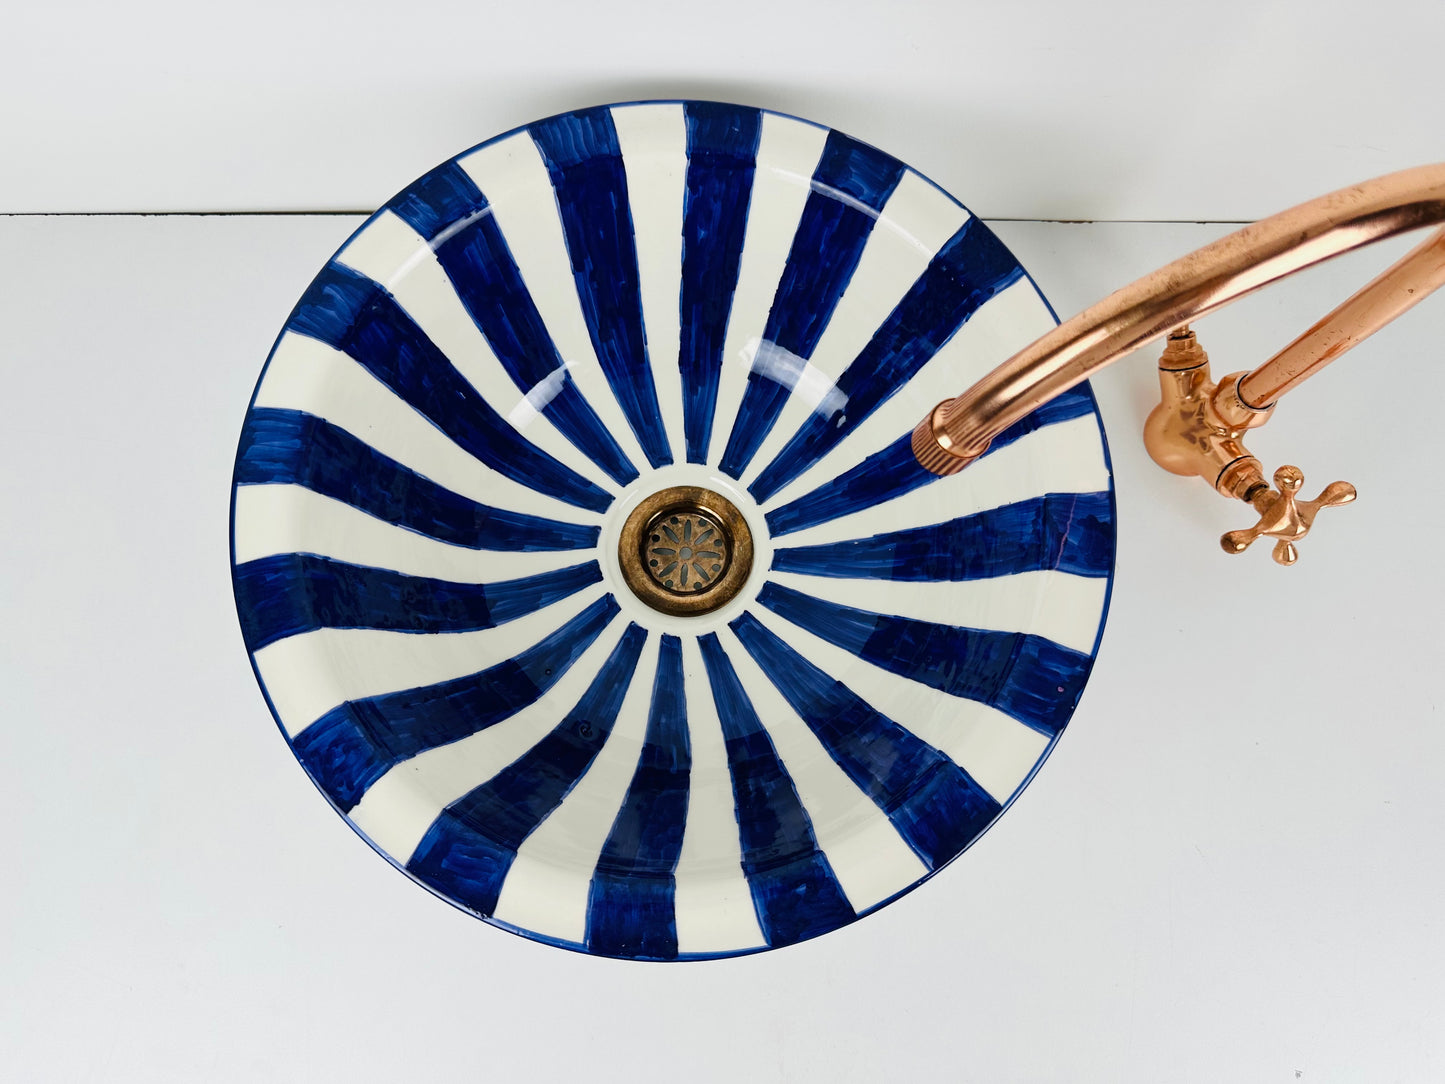 Barcode Blue: Handcrafted Ceramic Sink with Barcode-Inspired Design in Blue